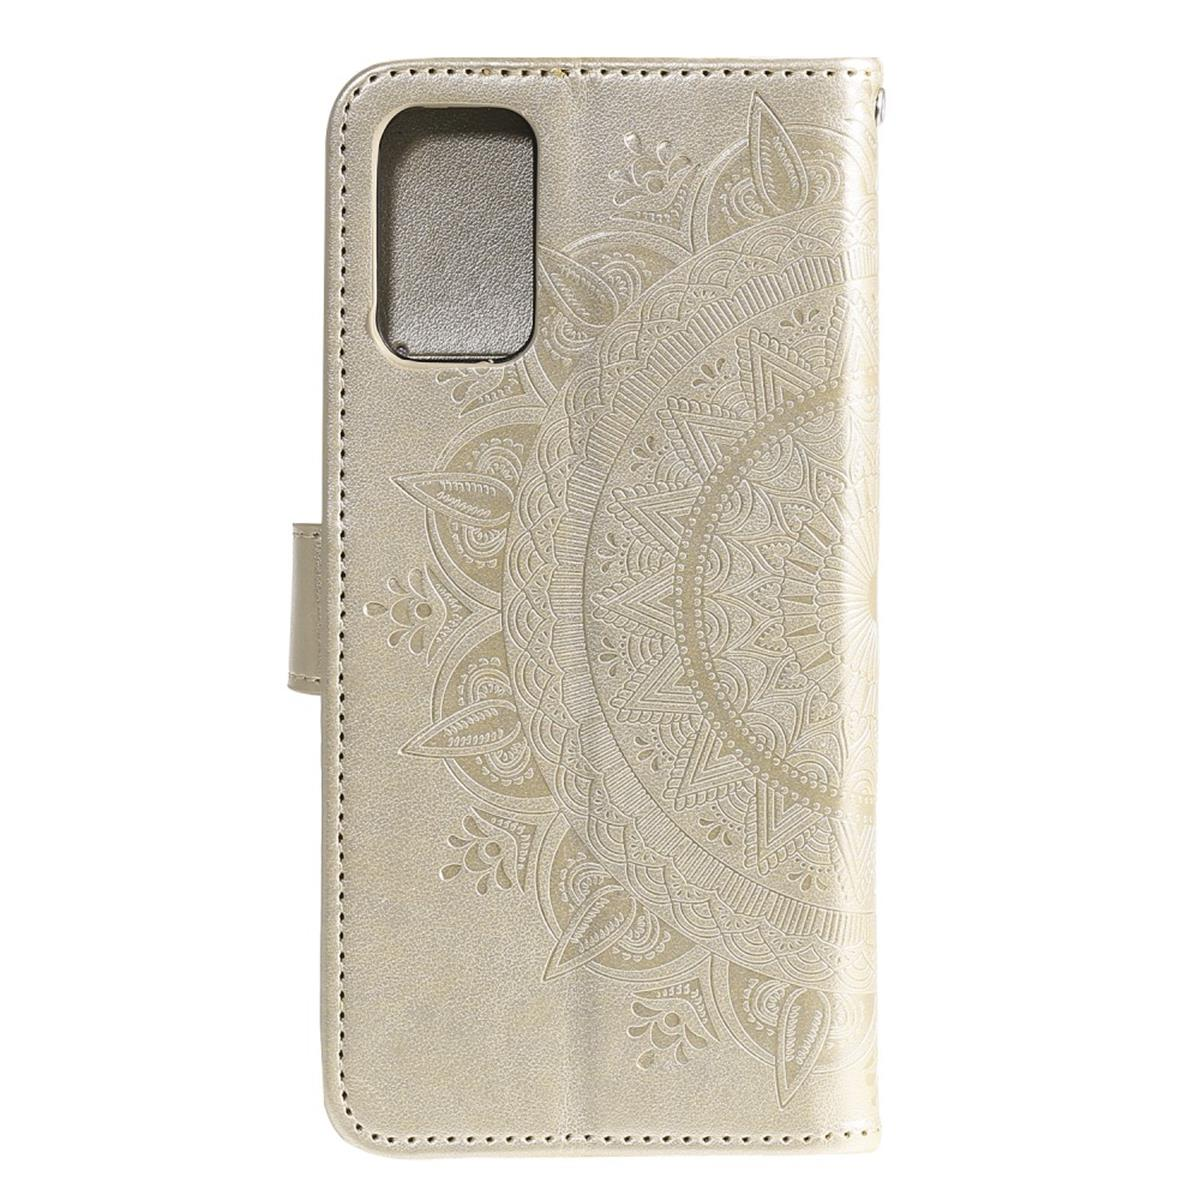 COVERKINGZ Huawei, Gold mit Bookcover, Mandala Y5p, Muster, Klapphülle